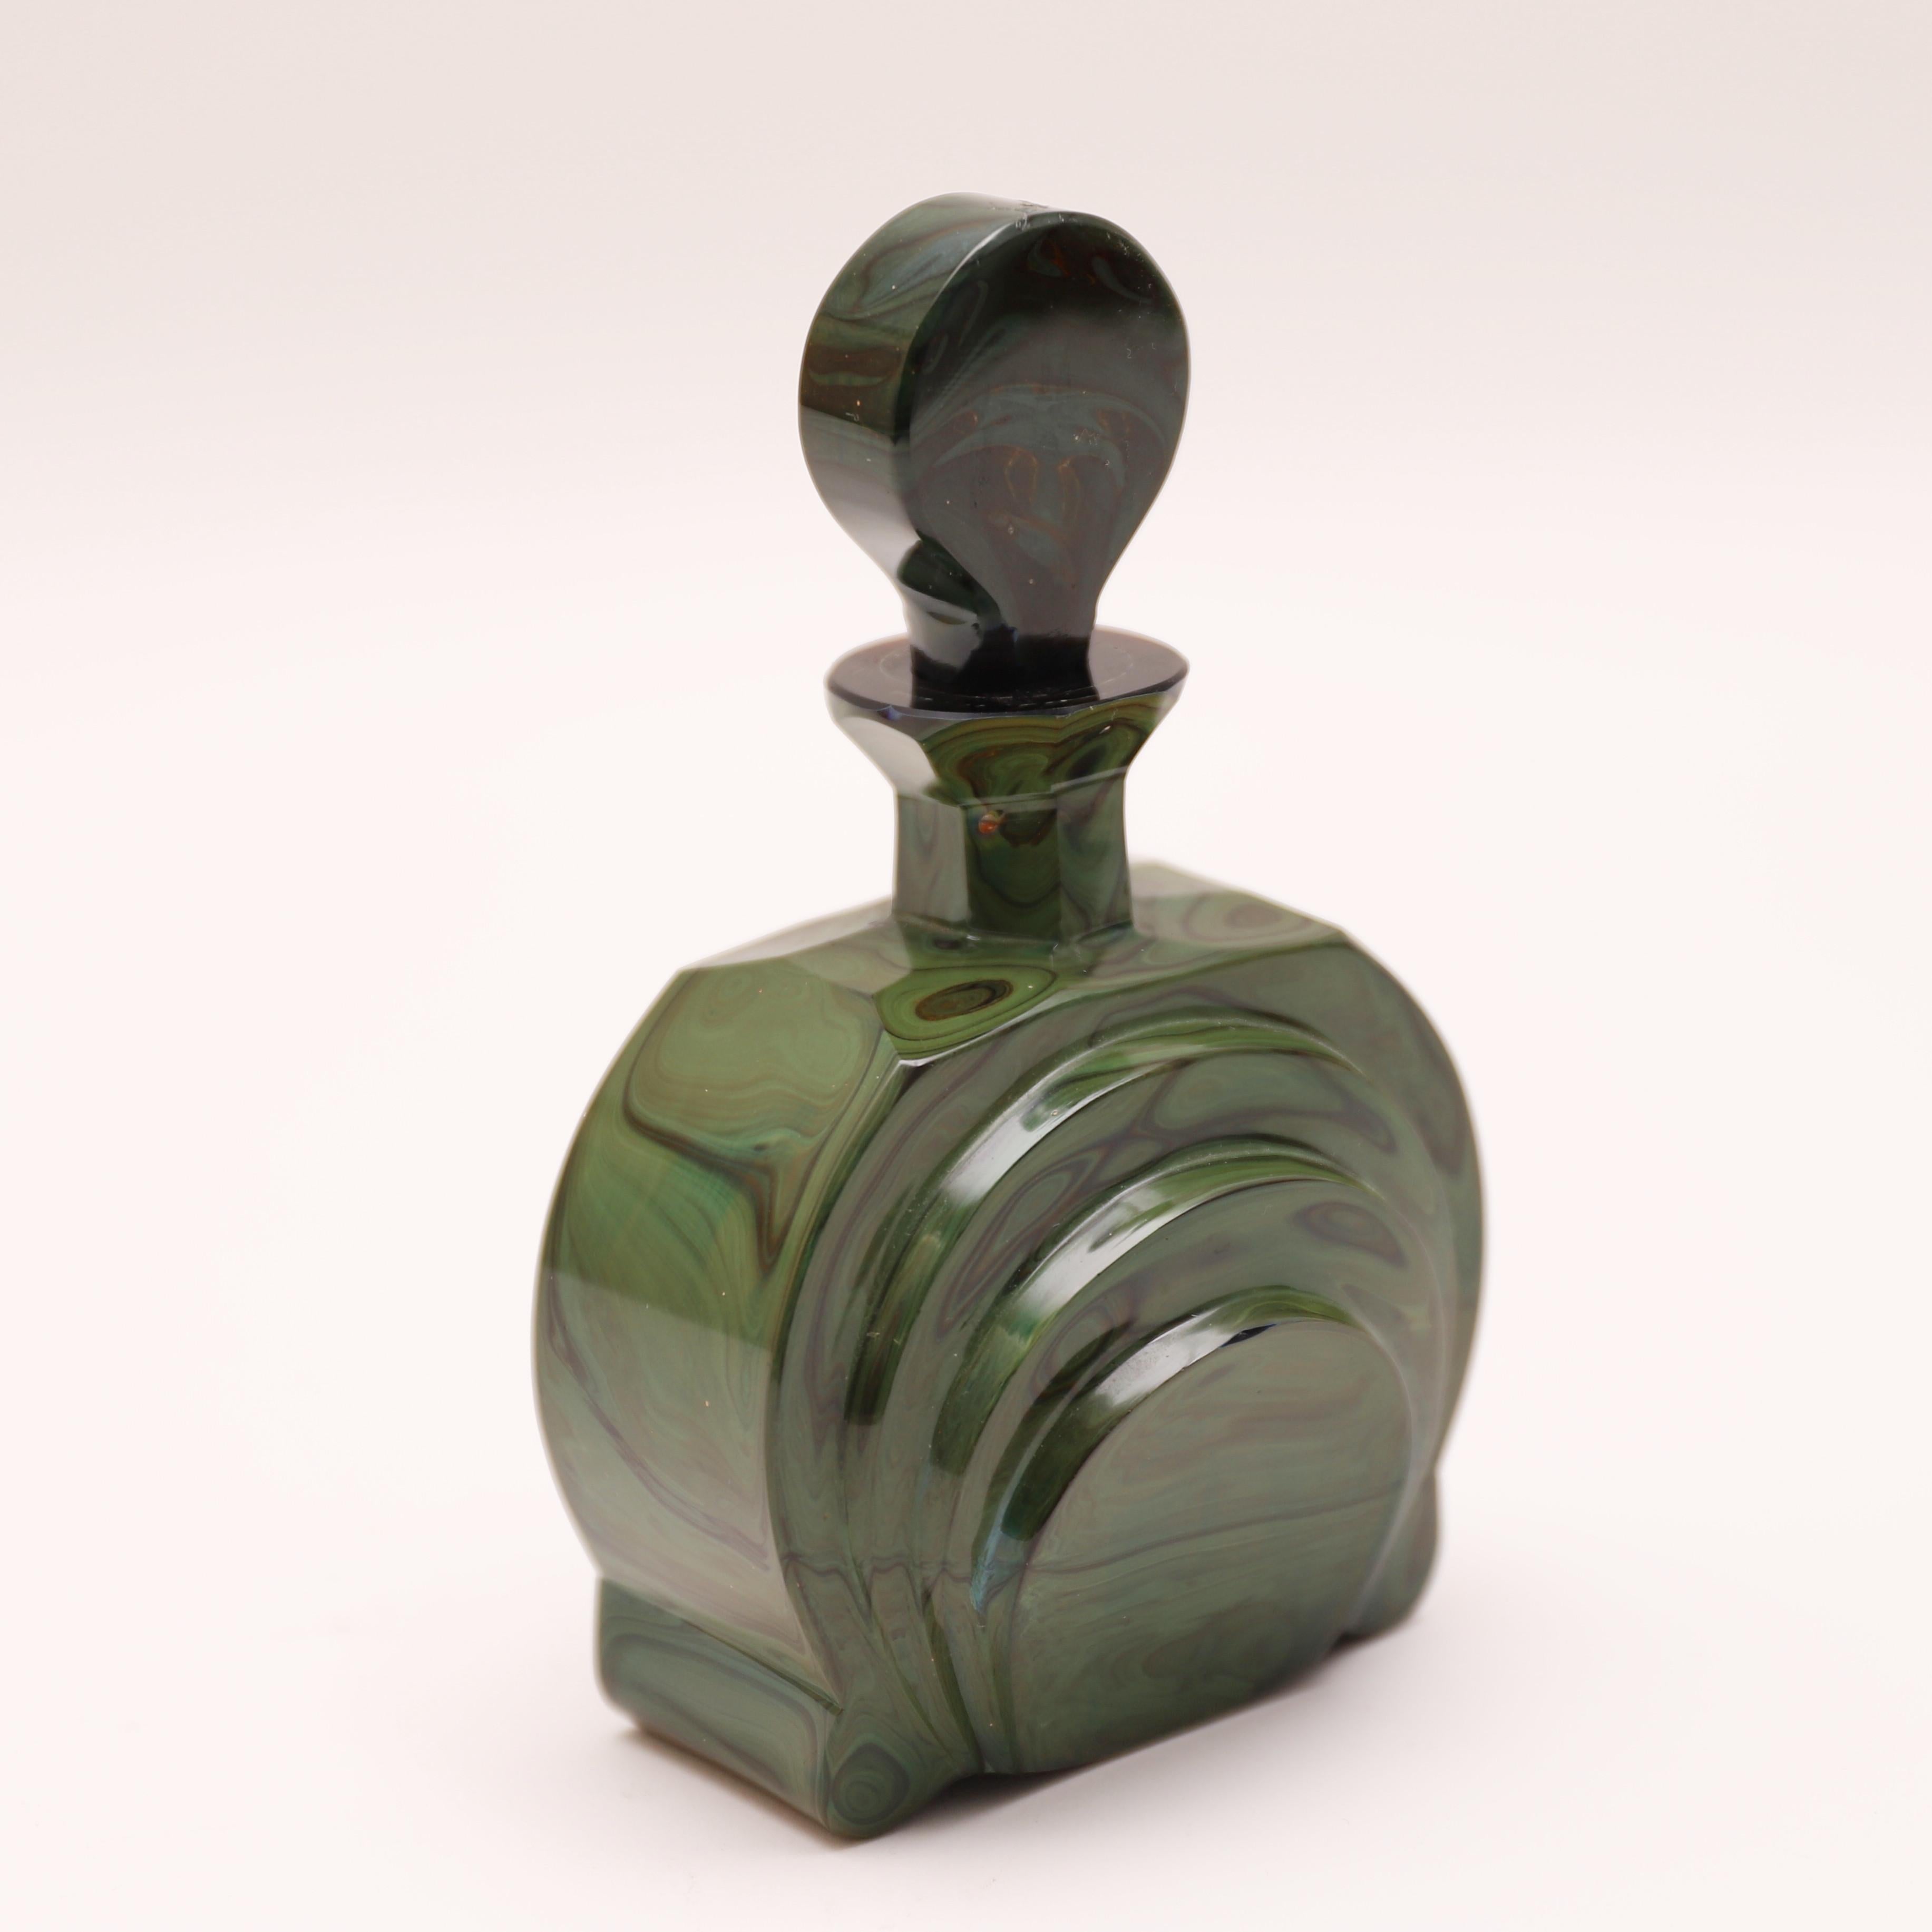 Bohemian Lithyalin Glass Perfume Bottle and Stopper, dark blue tint with emerald and olive green marbling, beautifully cut and polished.
Lithyalin Glass is an Opaque or Translucent Marbled Glass with a Surface Resembling Marble or Polished